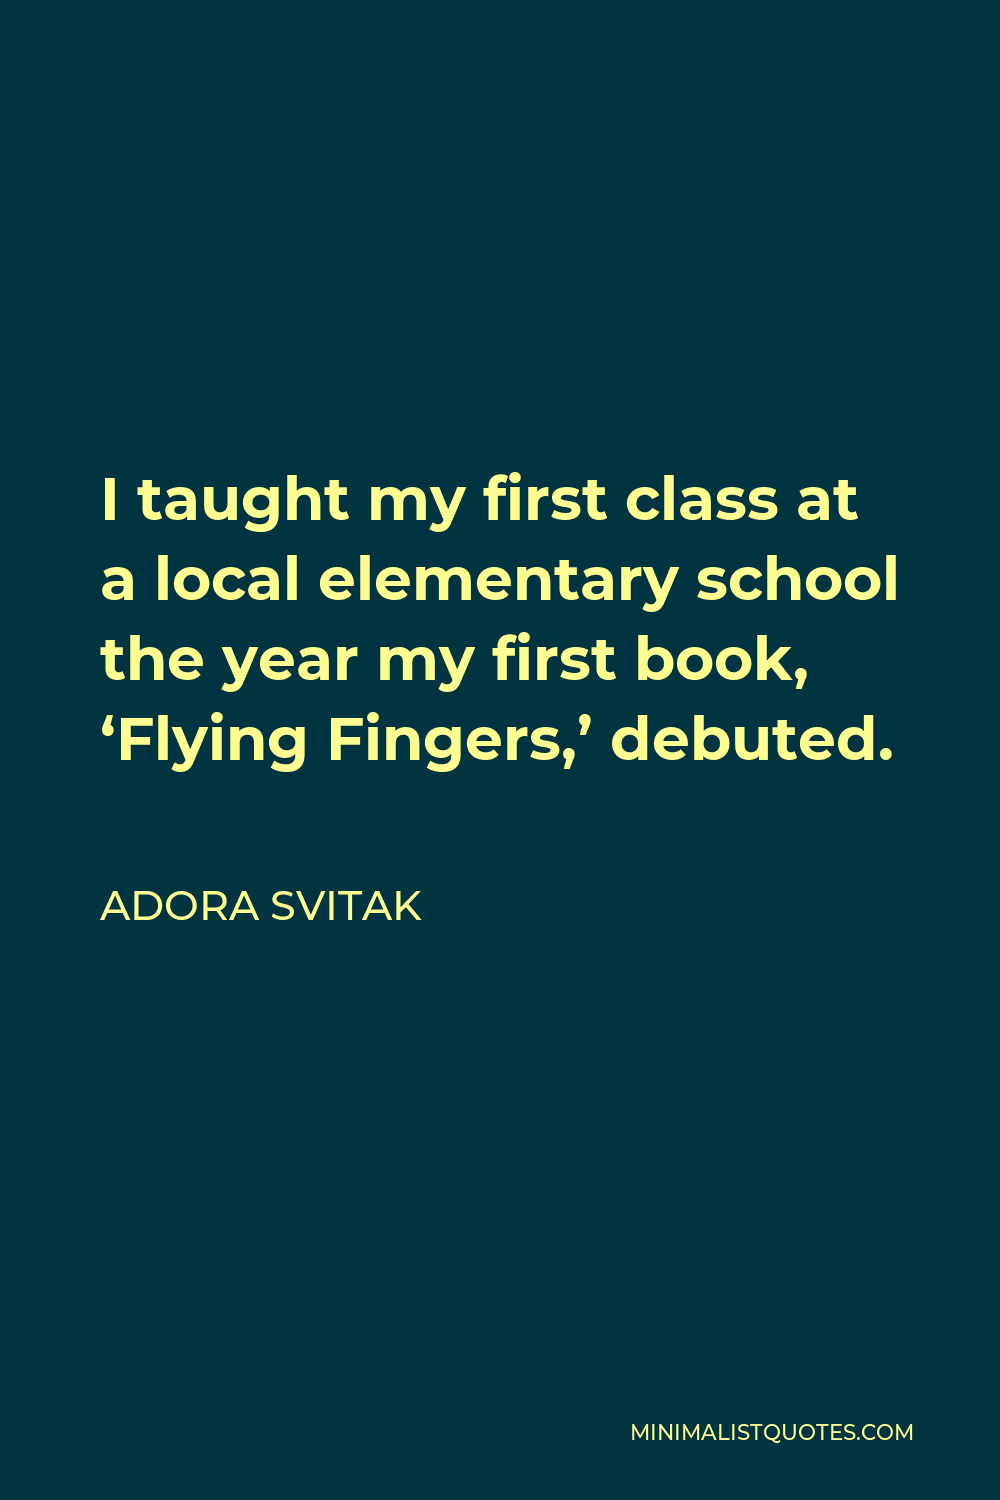 Adora Svitak Quote - I taught my first class at a local elementary school the year my first book, ‘Flying Fingers,’ debuted.